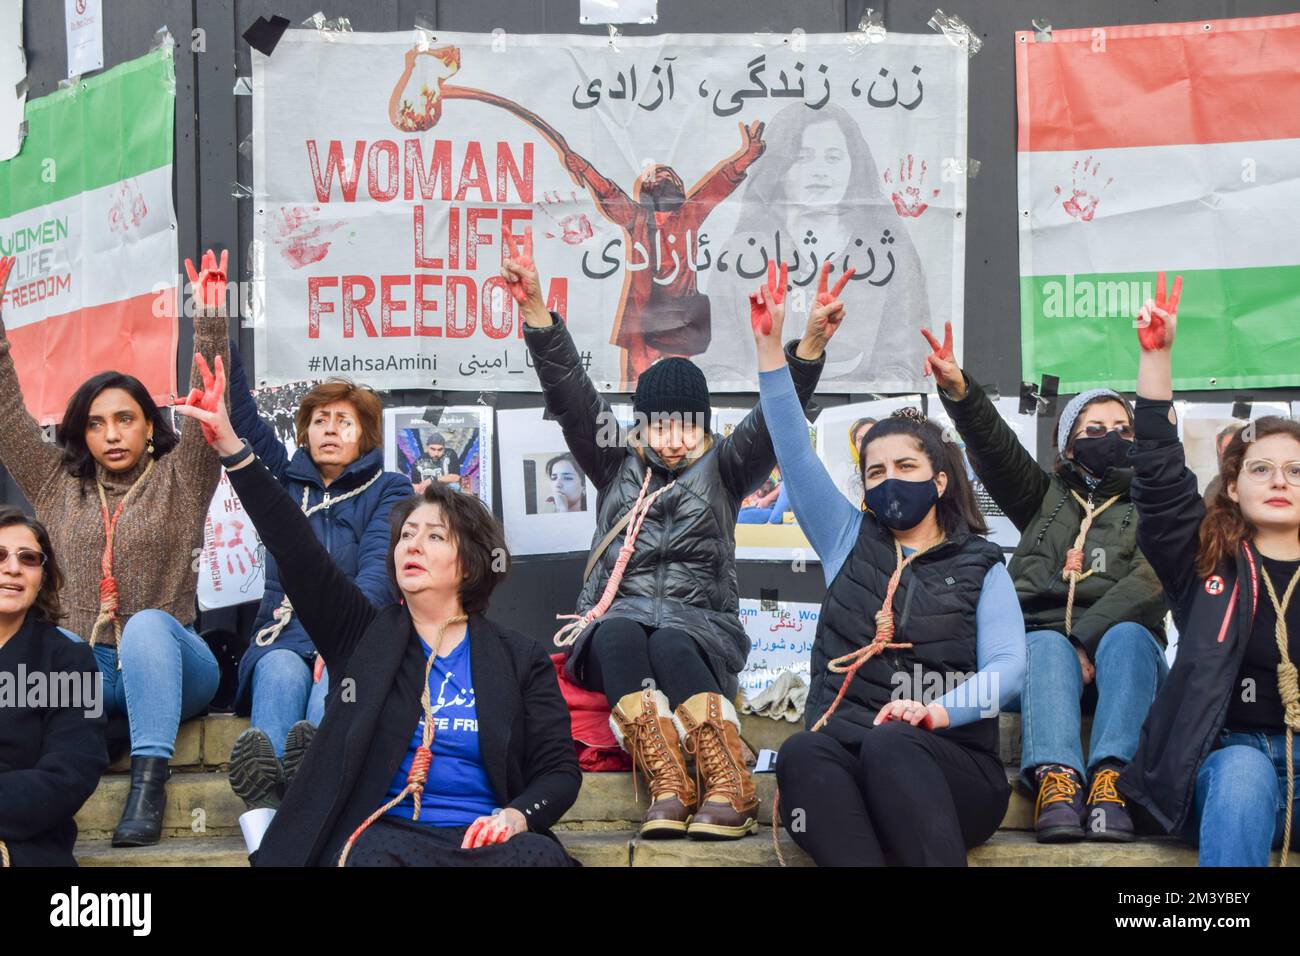 London, UK. 17th December 2022. A group of women staged a demonstration and performance in Piccadilly Circus in protest against the reported executions of anti-government protesters in Iran. The activists tied ropes around their necks and covered their hands in fake blood. Credit: Vuk Valcic/Alamy Live News Stock Photo